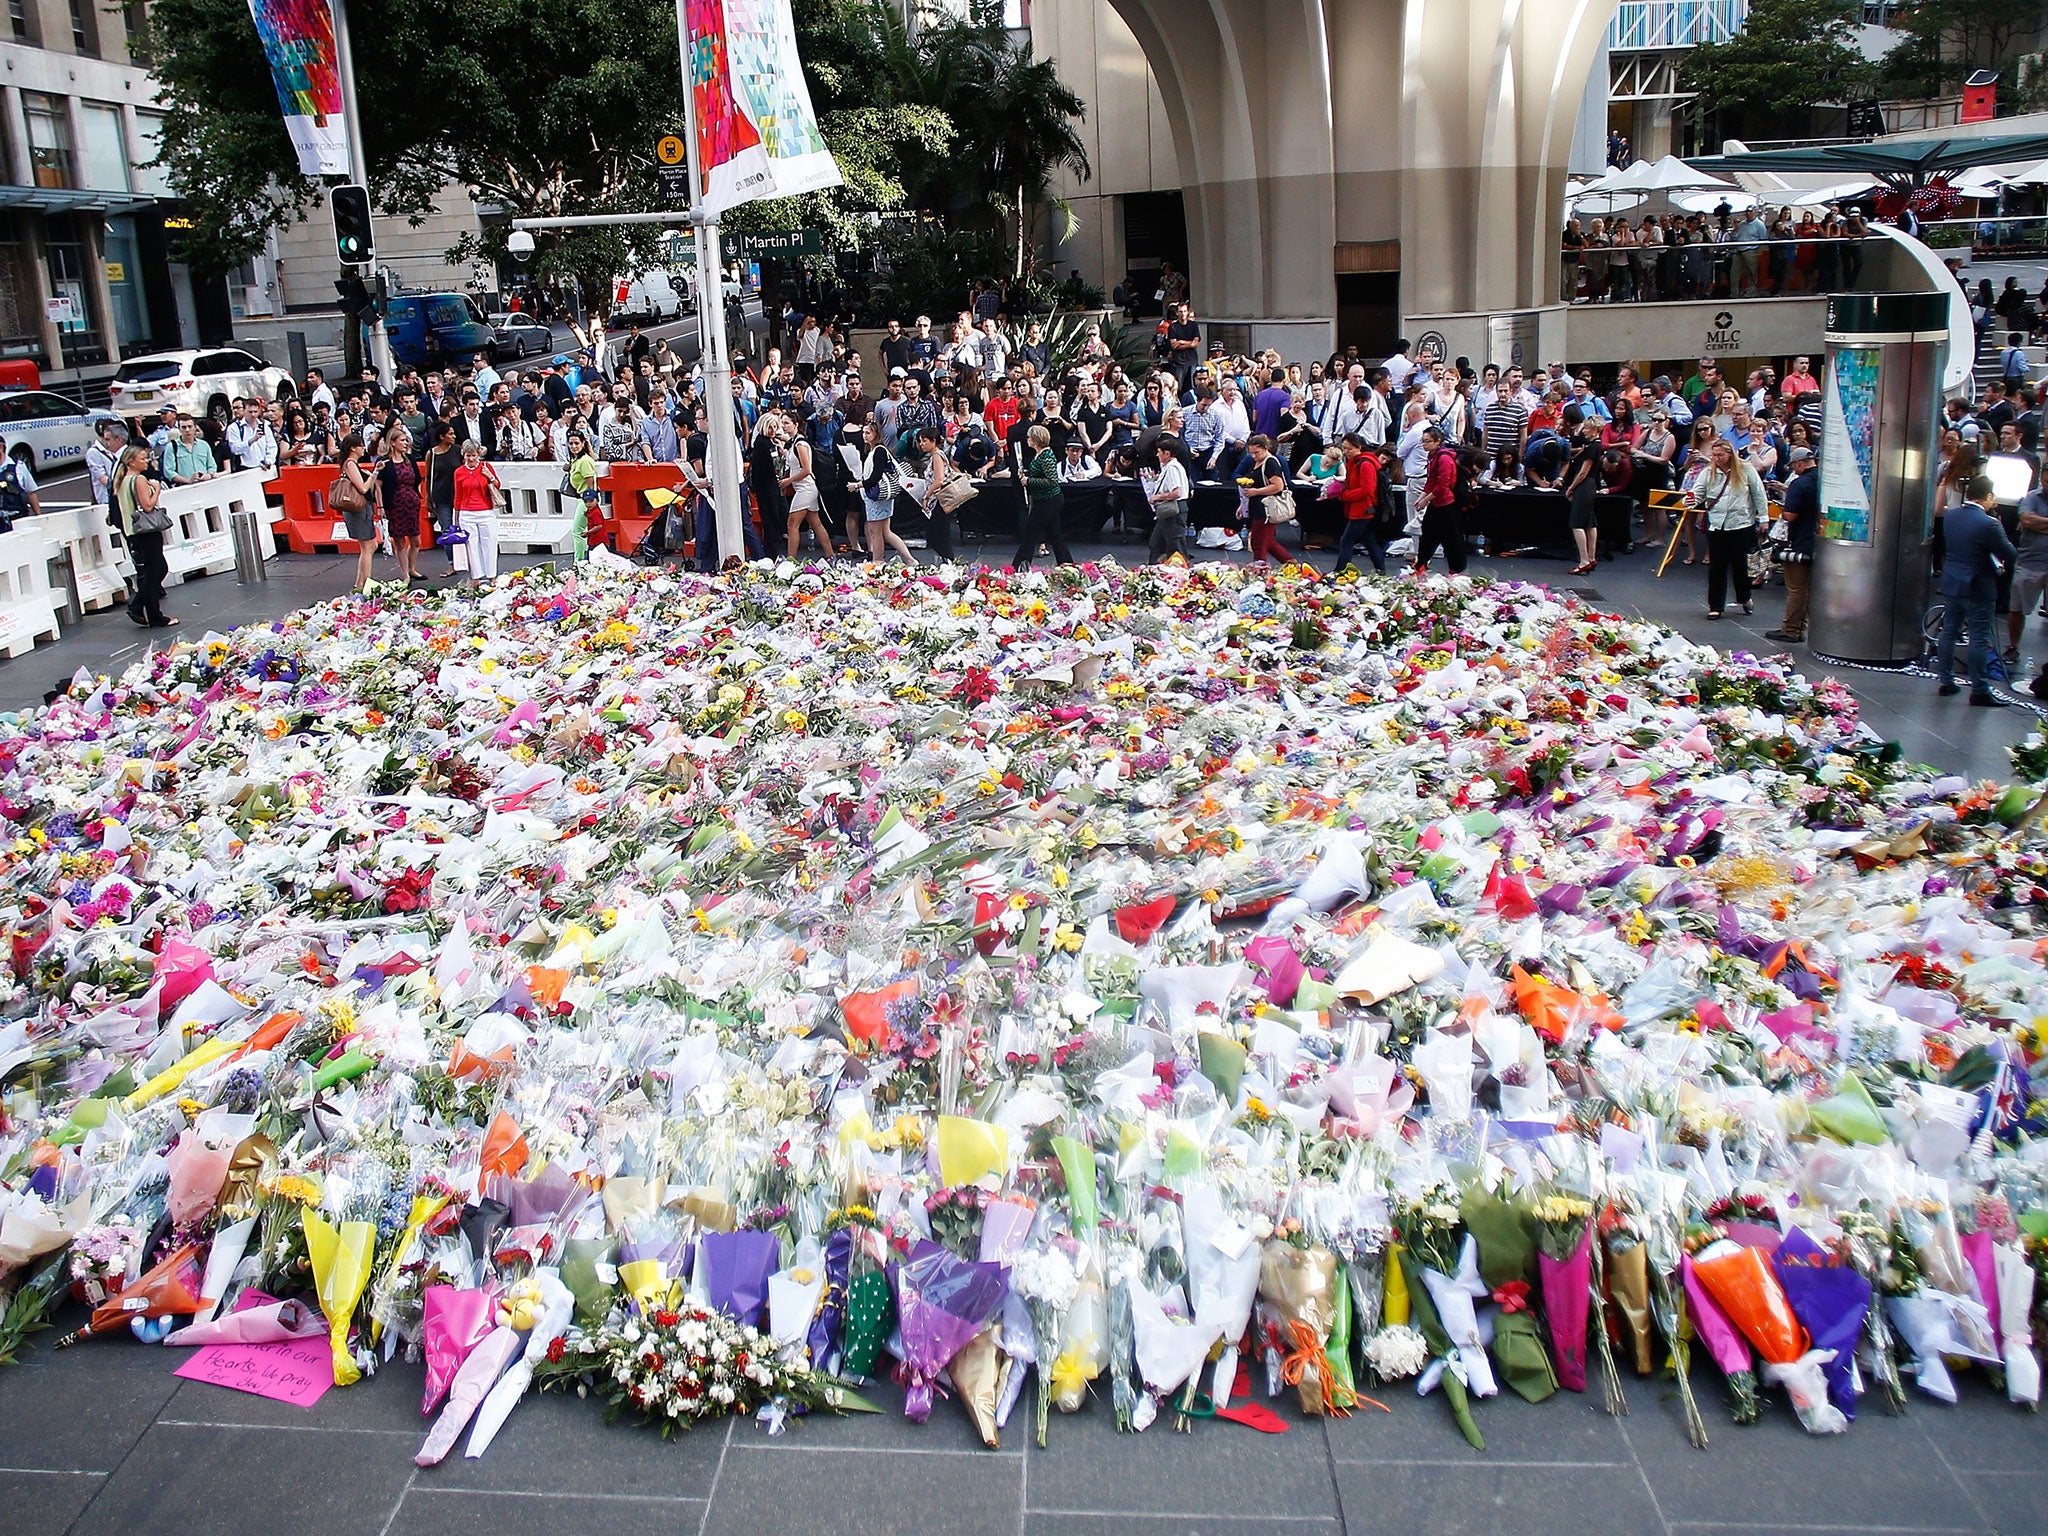 Flowers are placed by people as a mark of respect for the victims of Martin Place siege in Sydney